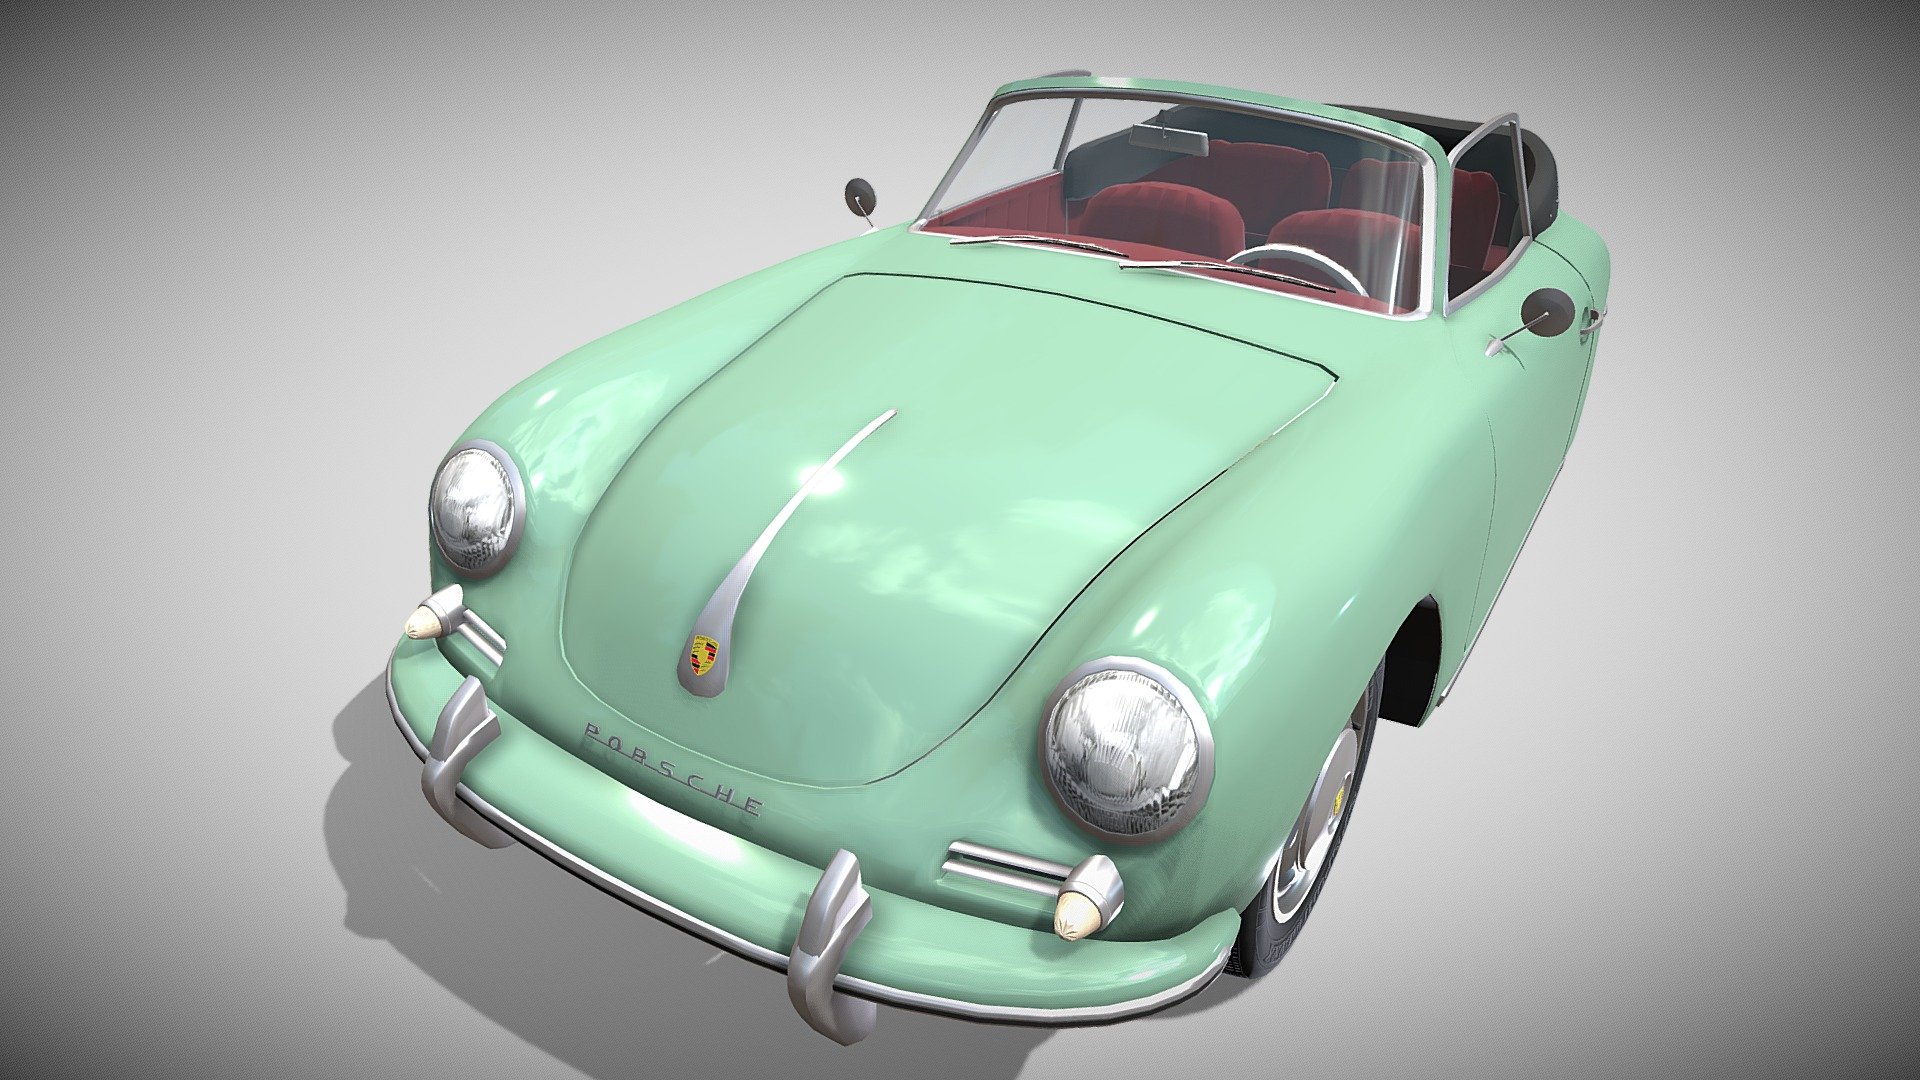 A very accurate model of a Porsche 356 Convertible with a HIGHLY DETAILED INTERIOR. The model comes in four formats:
-.blend, rendered with cycles, as seen in the images;
-.obj, with materials applied and textures;
-.dae, with materials applied and textures;
-.stl, ready to print in 3D;

This 3d model was originally created in Blender 2.71 and rendered with Cycles.
The model has materials applied in all formats, and are ready to import and render.
The model is built strictly out of quads and is subdivisable:

Subdivision 0: 204,541 verts / 200,831 polys
Subdivision 1: 384,334 verts / 379,988 polys
Subdivision 2: 652,742 verts / 643,945 polys

It comes in separate parts, named correctly for the sake of convenience.

For any problems please feel free to contact me.

Don't forget to rate and enjoy! - Porsche 356 Convertible rev - Buy Royalty Free 3D model by dragosburian 3d model